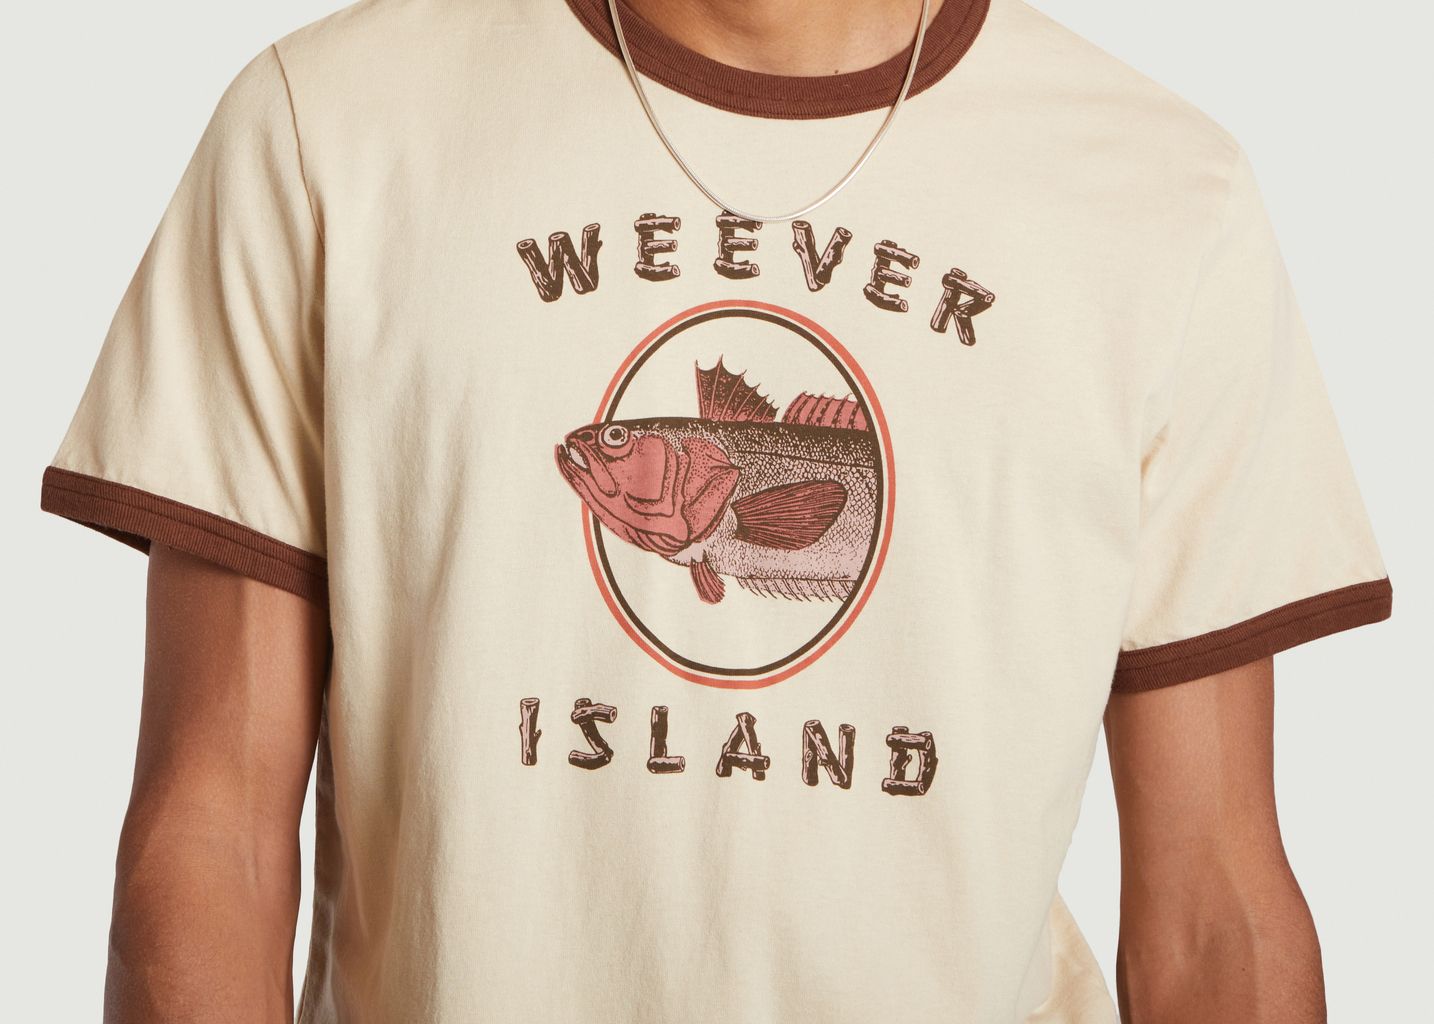 Roy Weever Island organic cotton printed t-shirt - Nudie Jeans